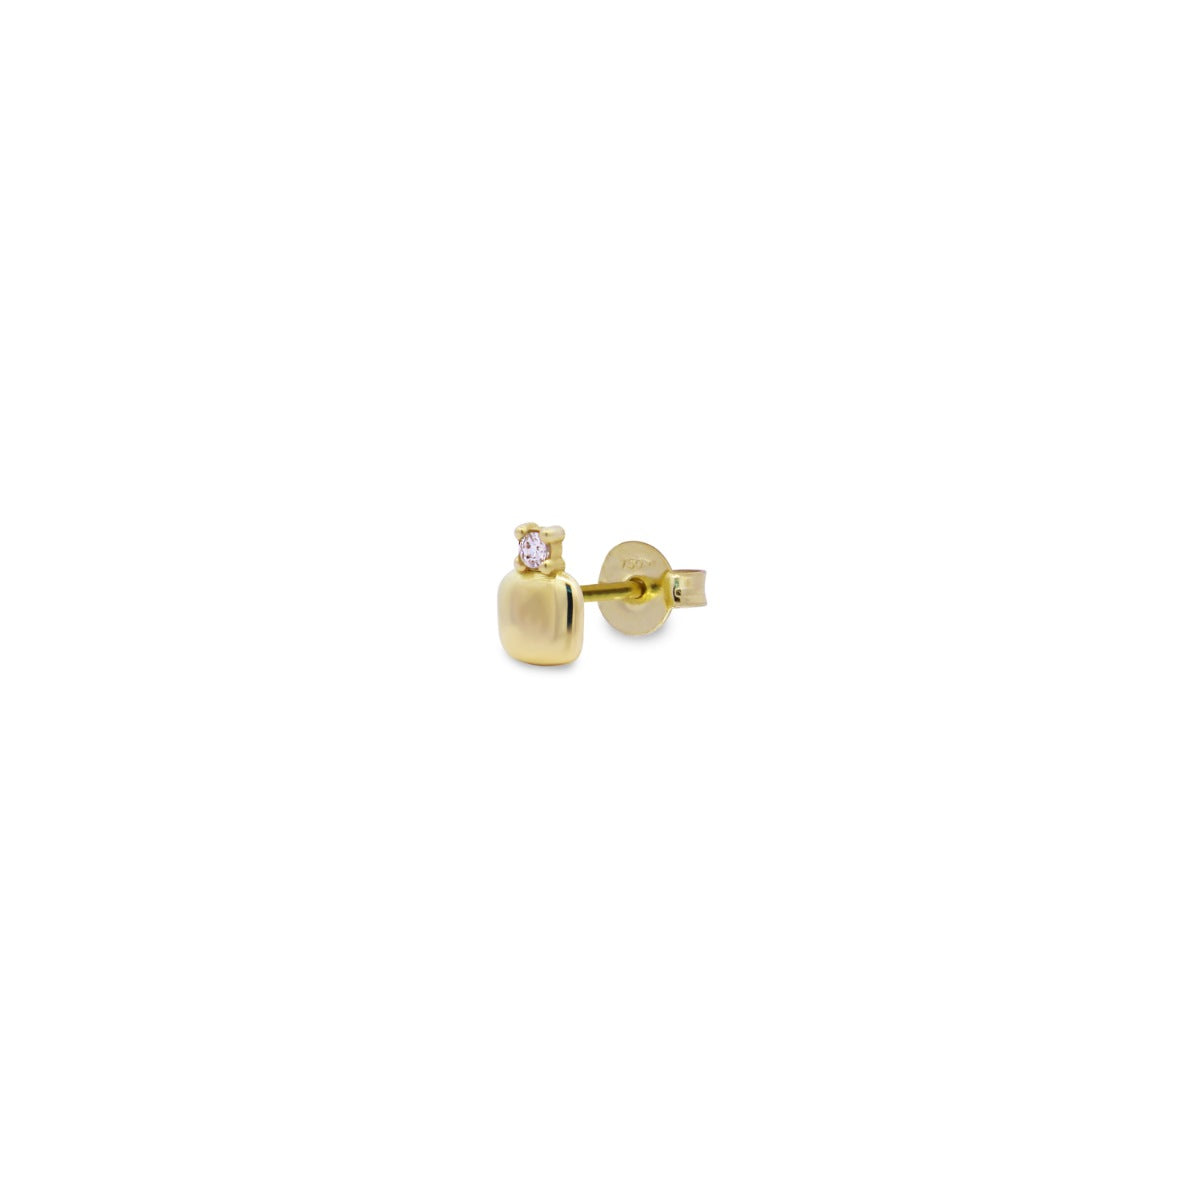 Earrings - Single earring with smooth square lobe and lab-grown diamond - ORO18KT - 1 | Rue des Mille